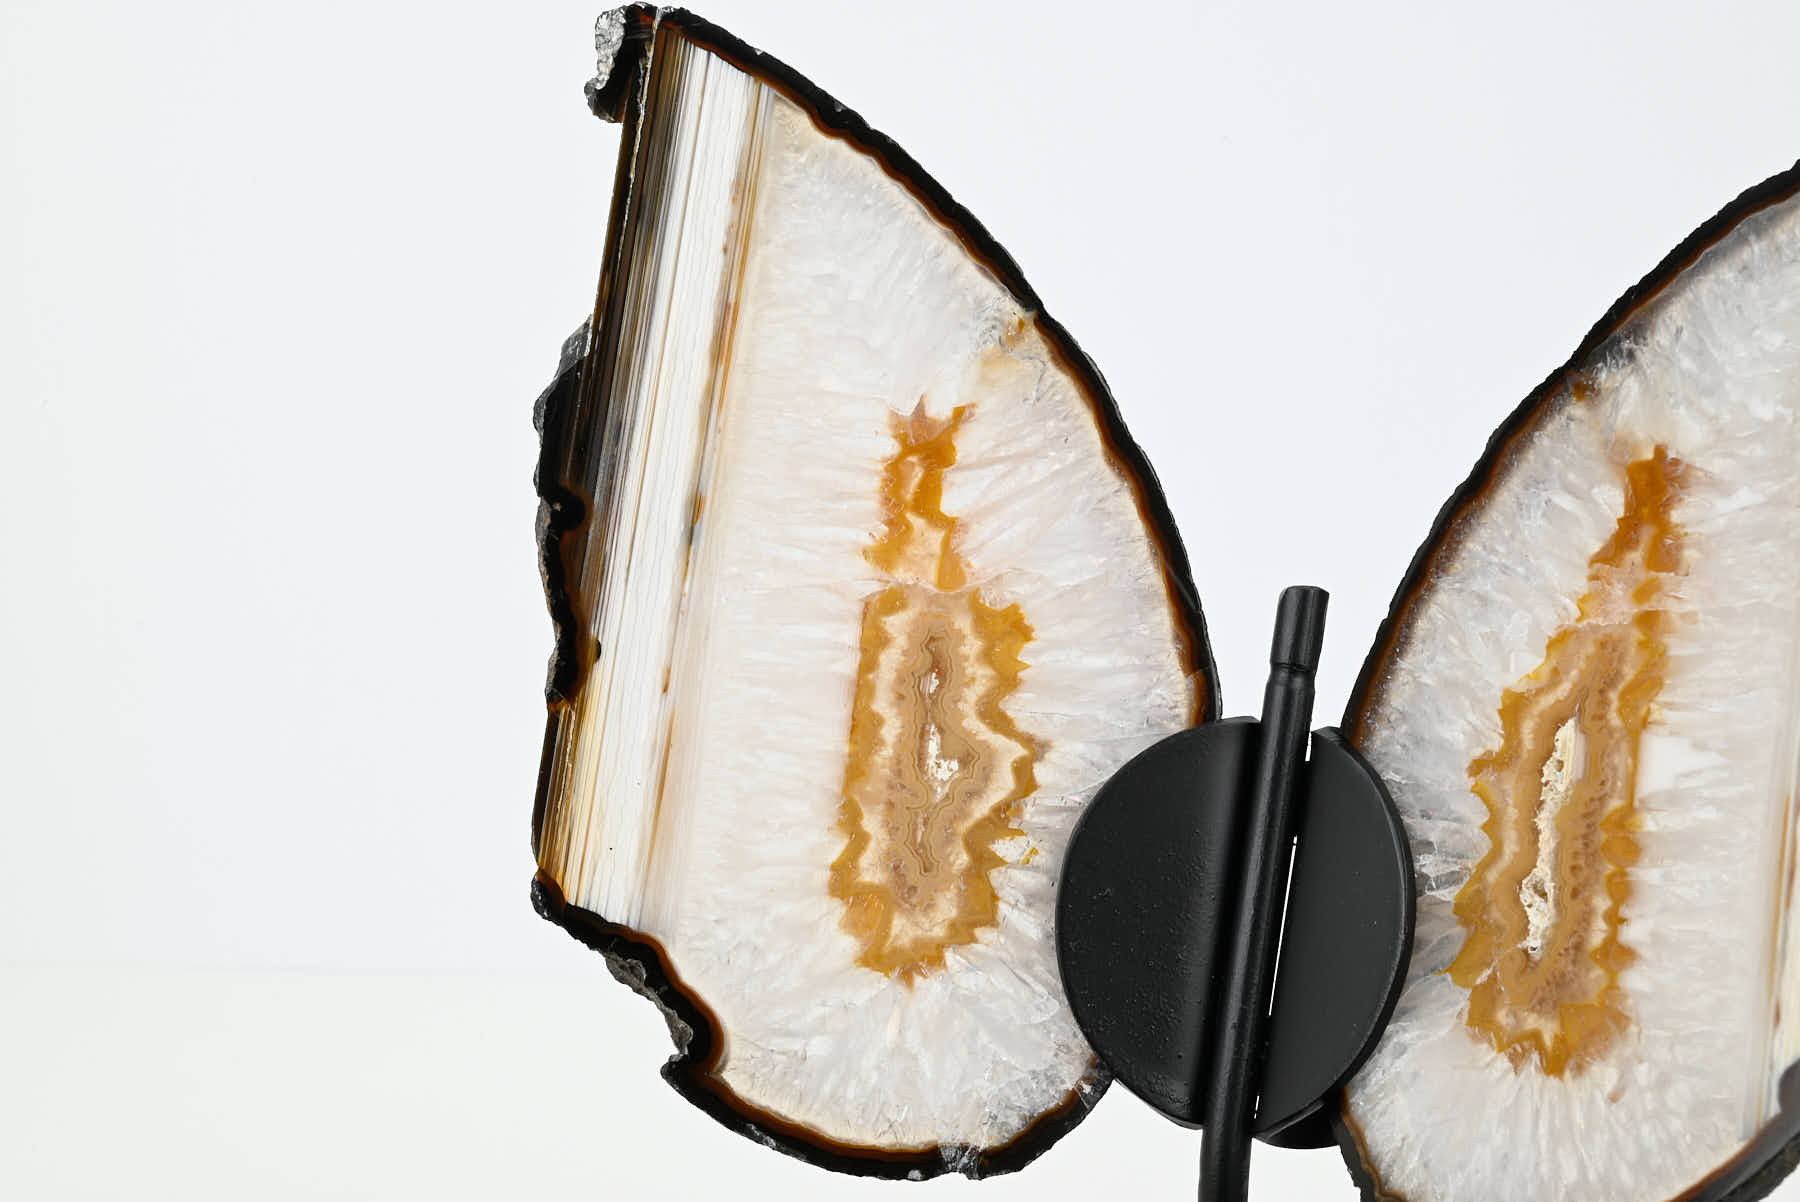 Natural Agate Butterfly on Stand - 0.59kg and 22cm Tall - #BUNATU-10016